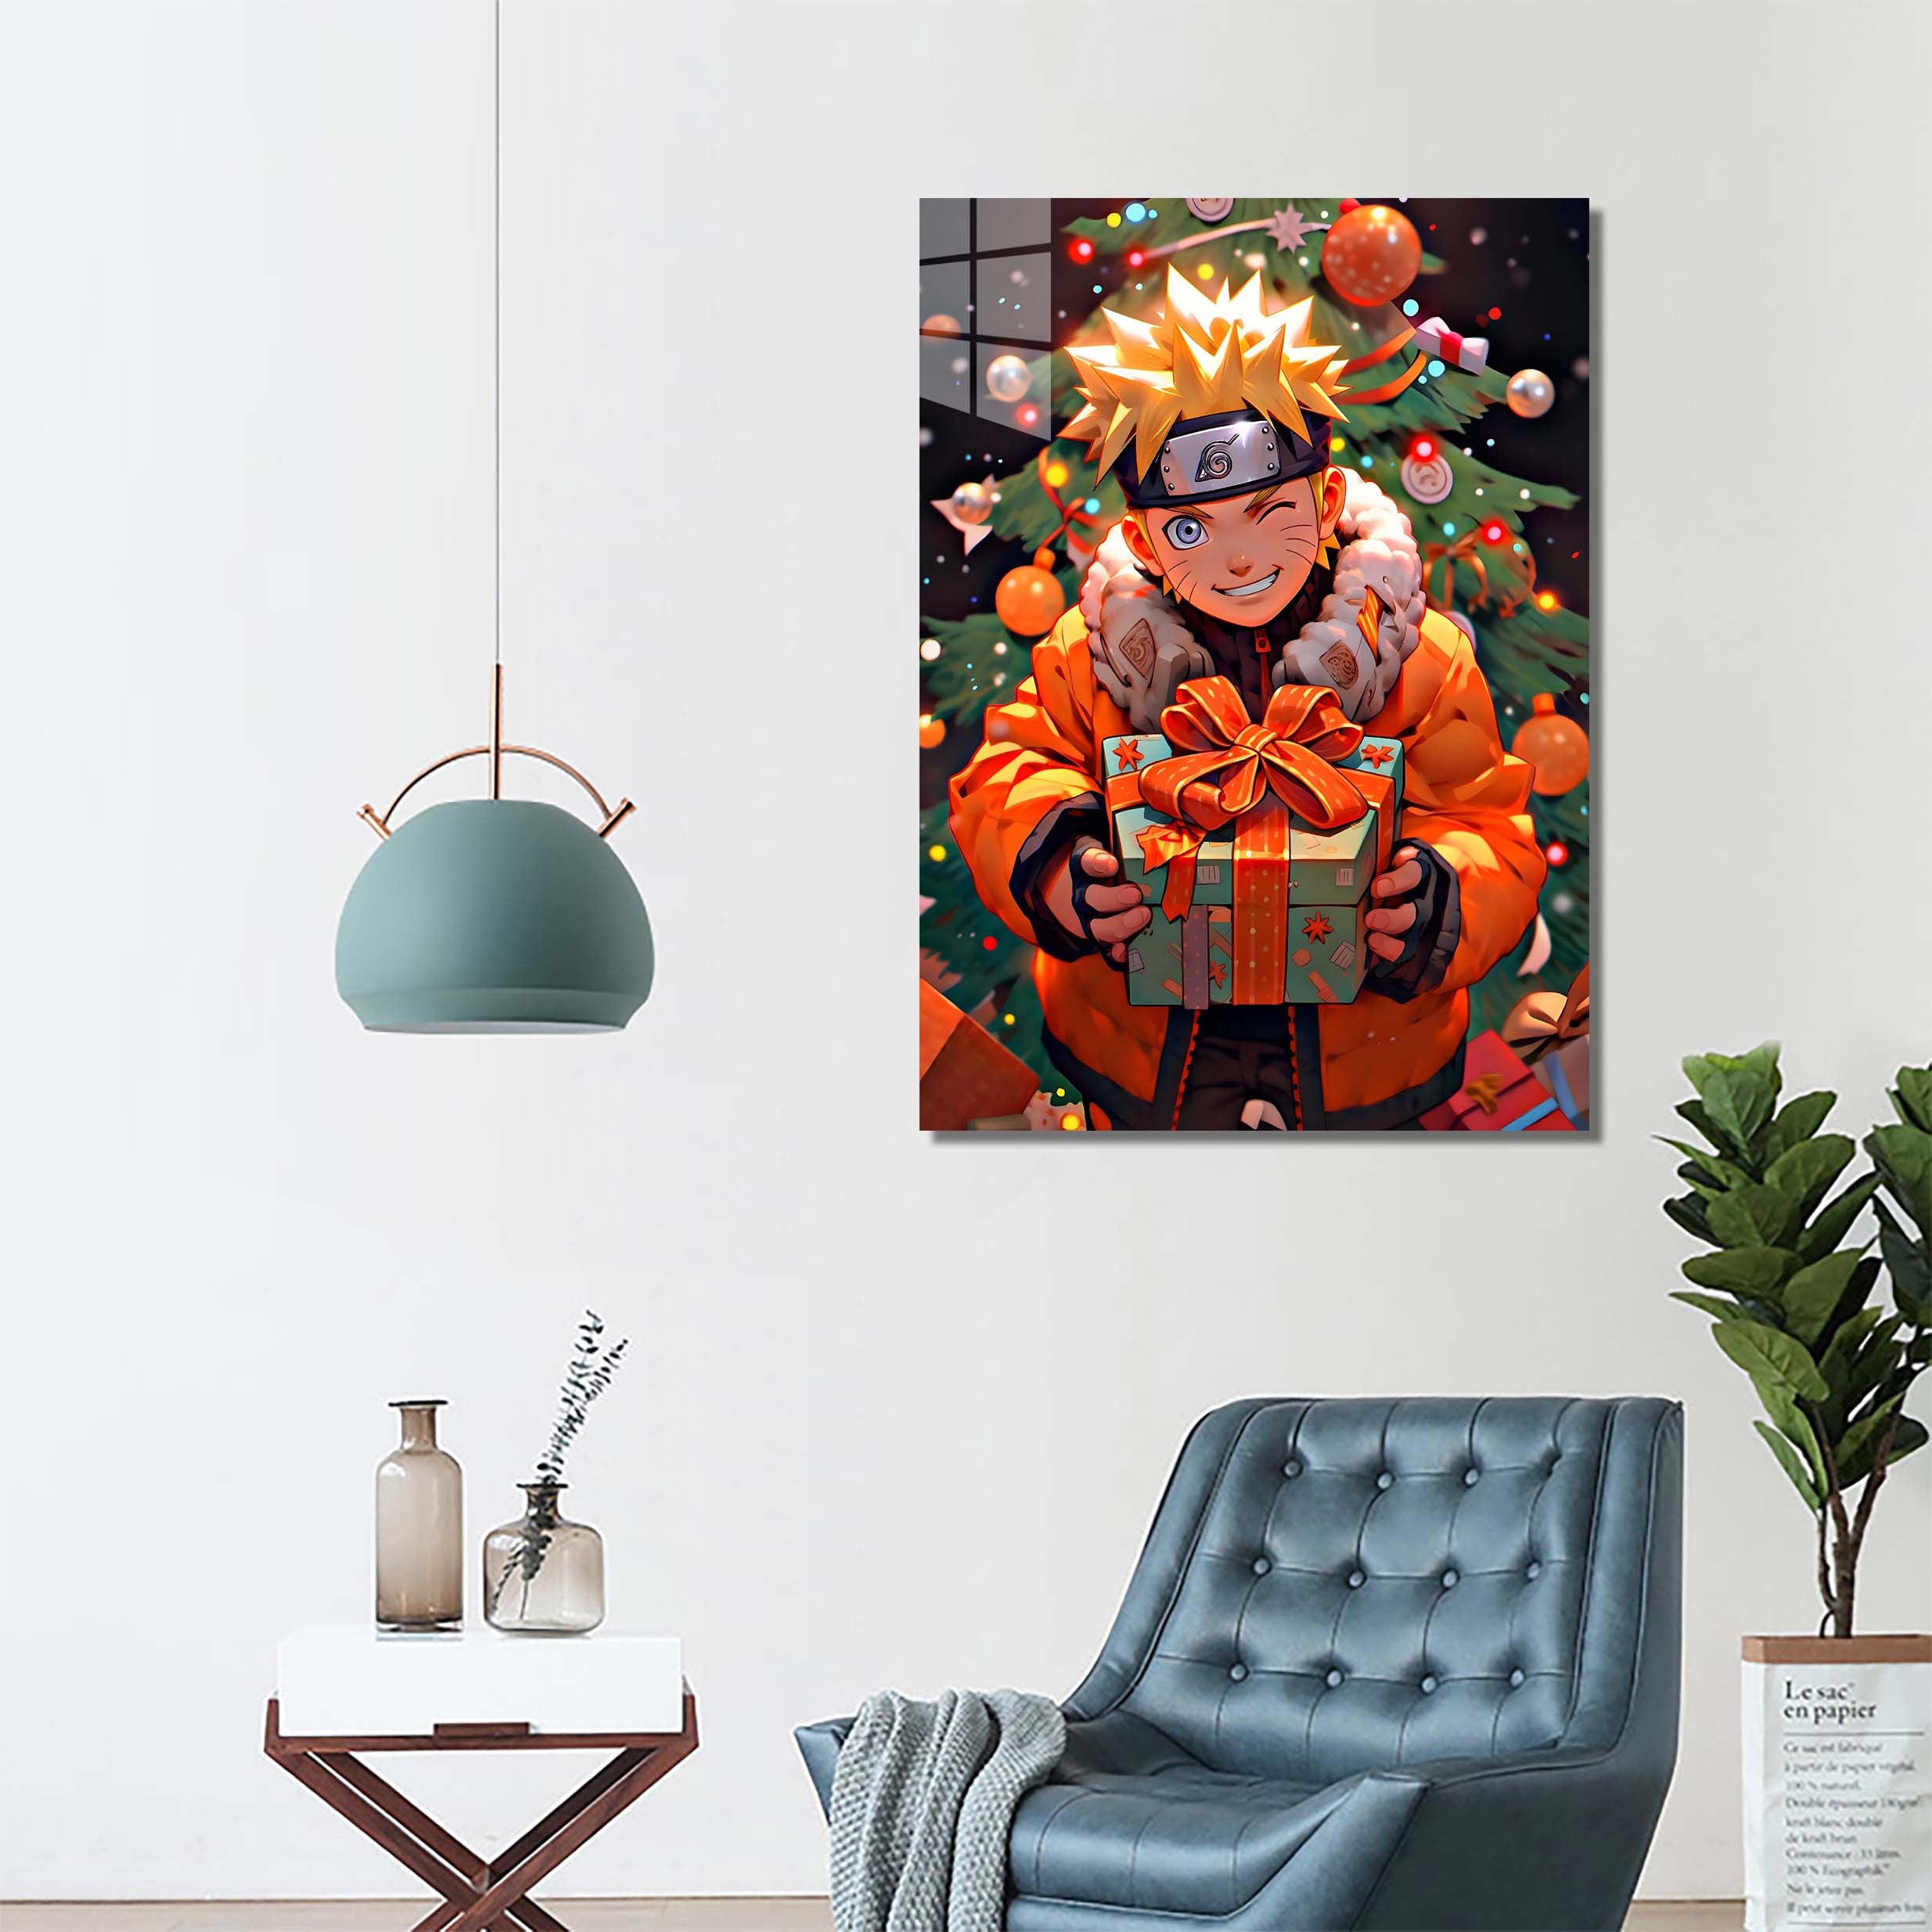 Naruto Uzumaki with gifts for Konoha Village-designed by @Vid_M@tion